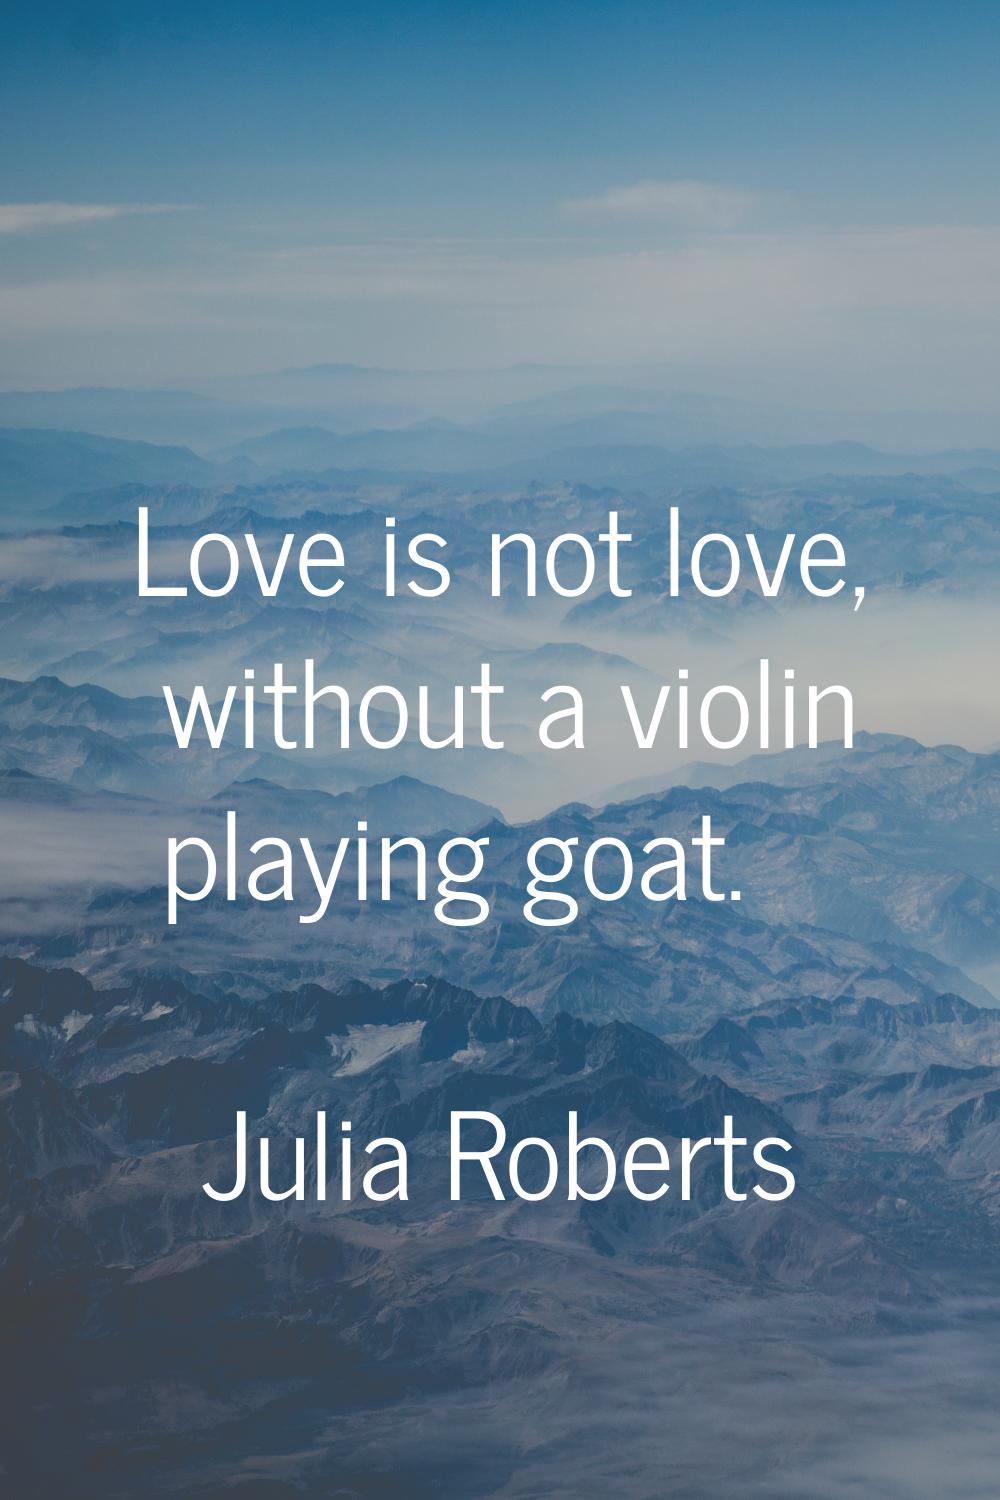 Love is not love, without a violin playing goat.